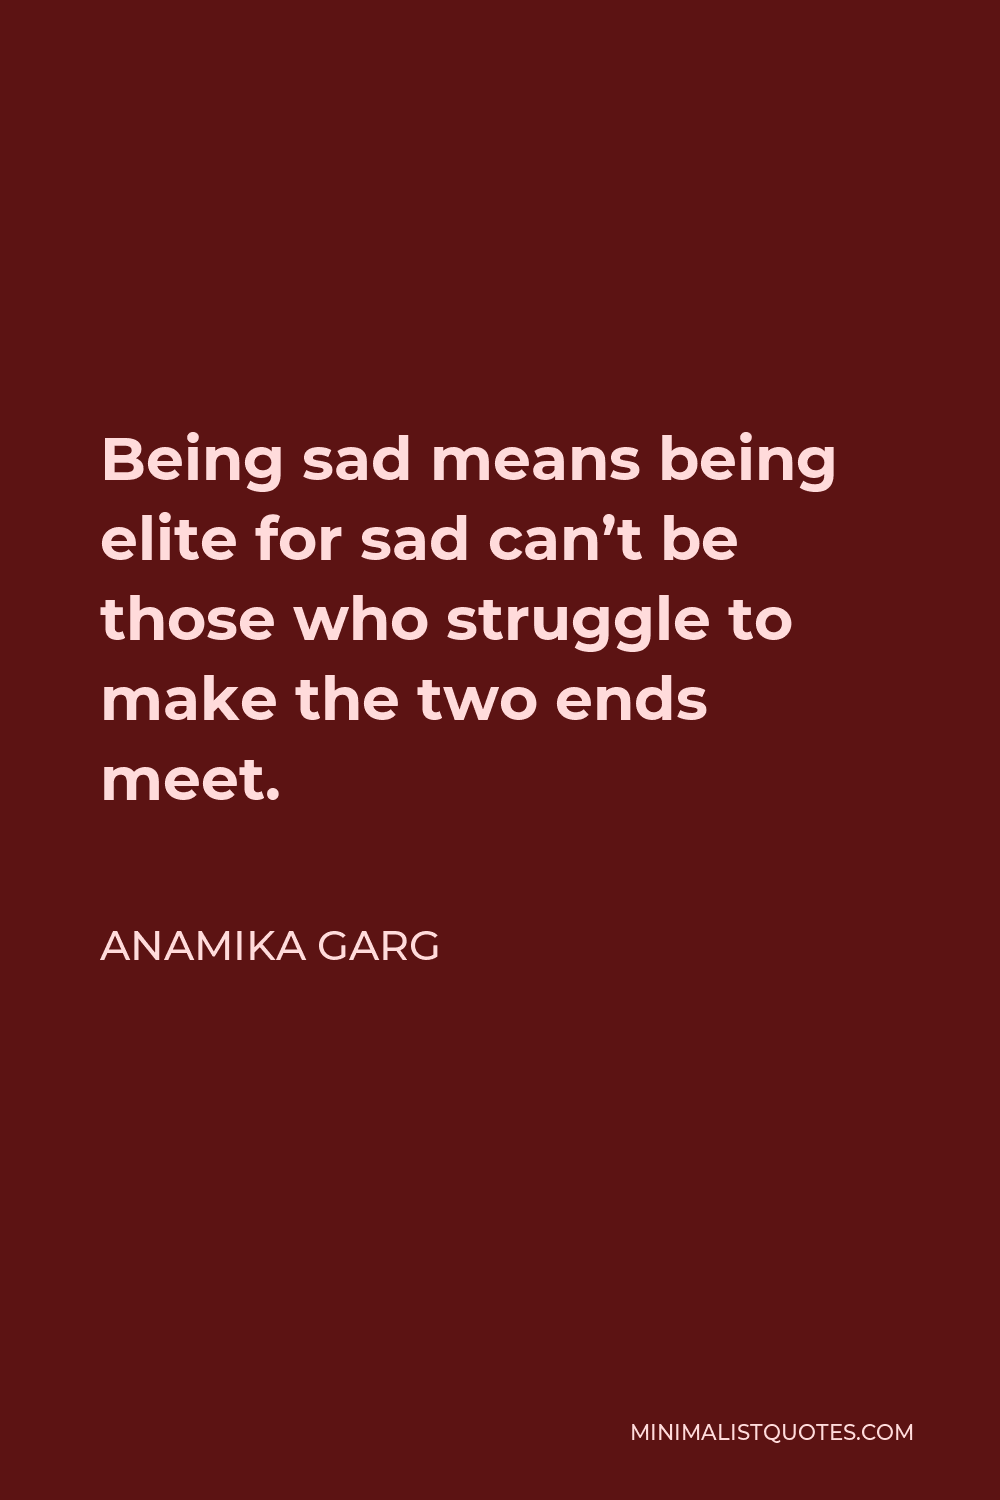 Anamika Garg Quote - Being sad means being elite for sad can’t be those who struggle to make the two ends meet.